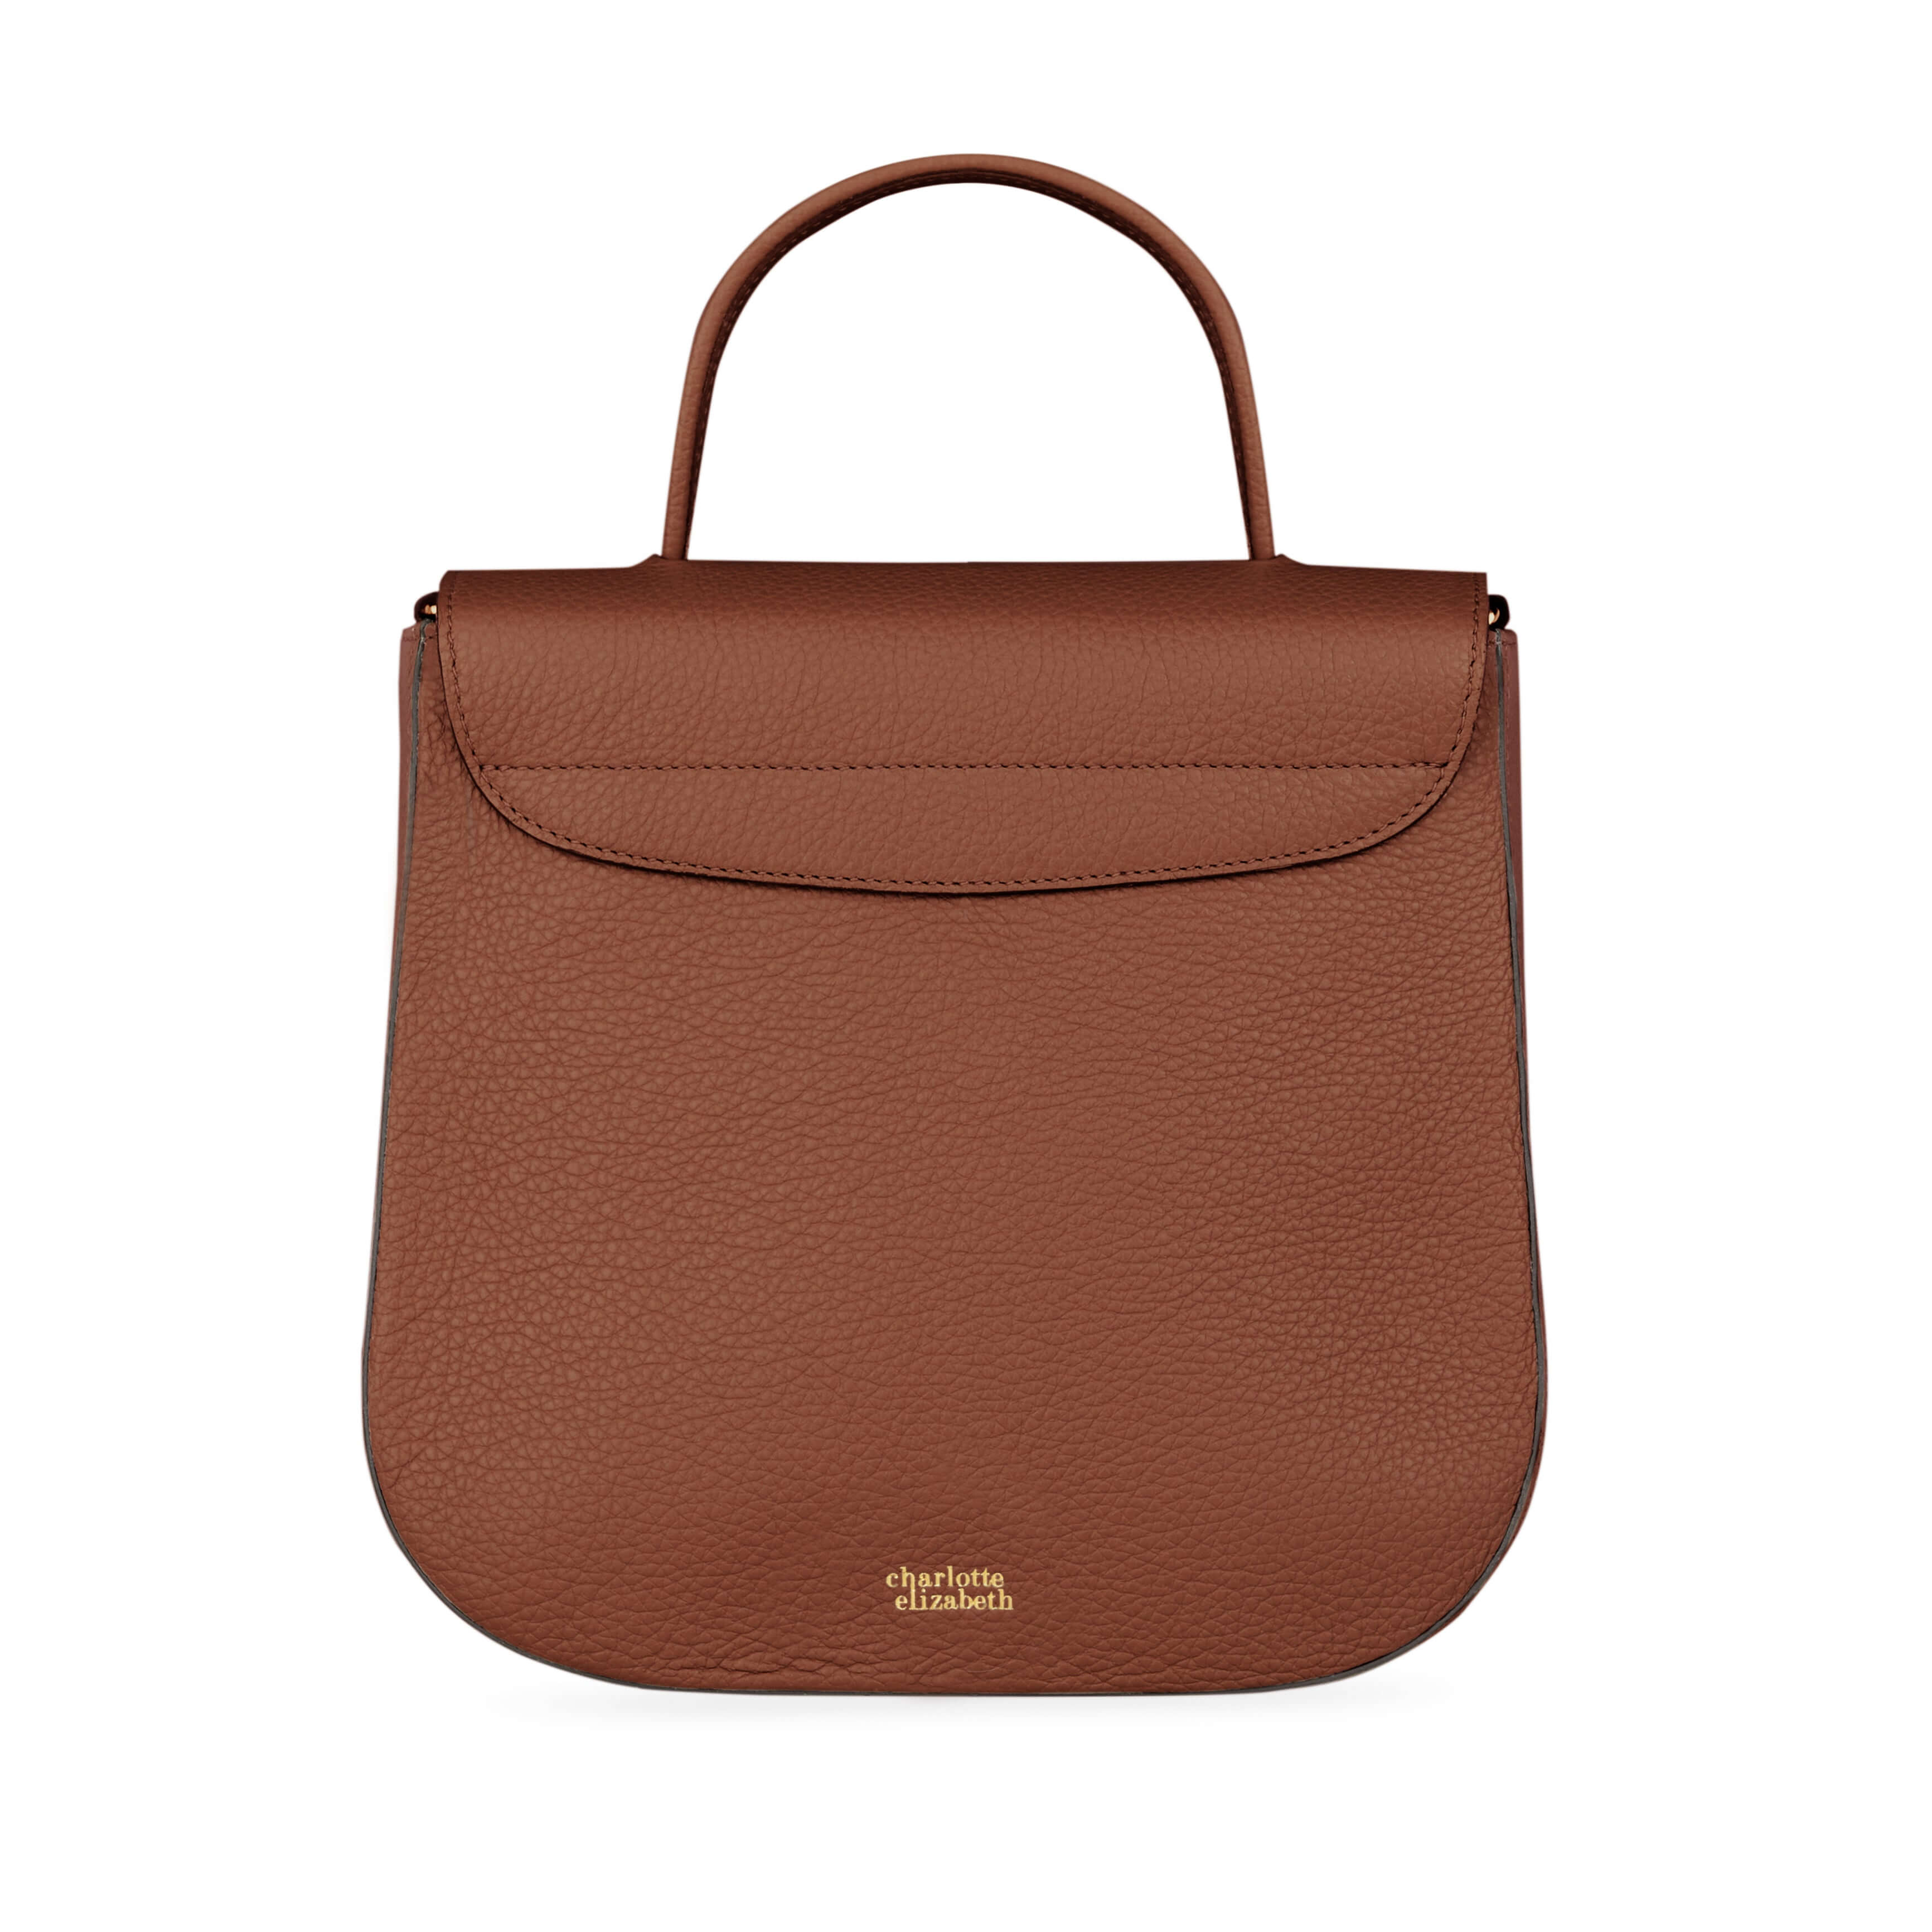 Shopping bag made by hand in top quality leather by Spanish artisans